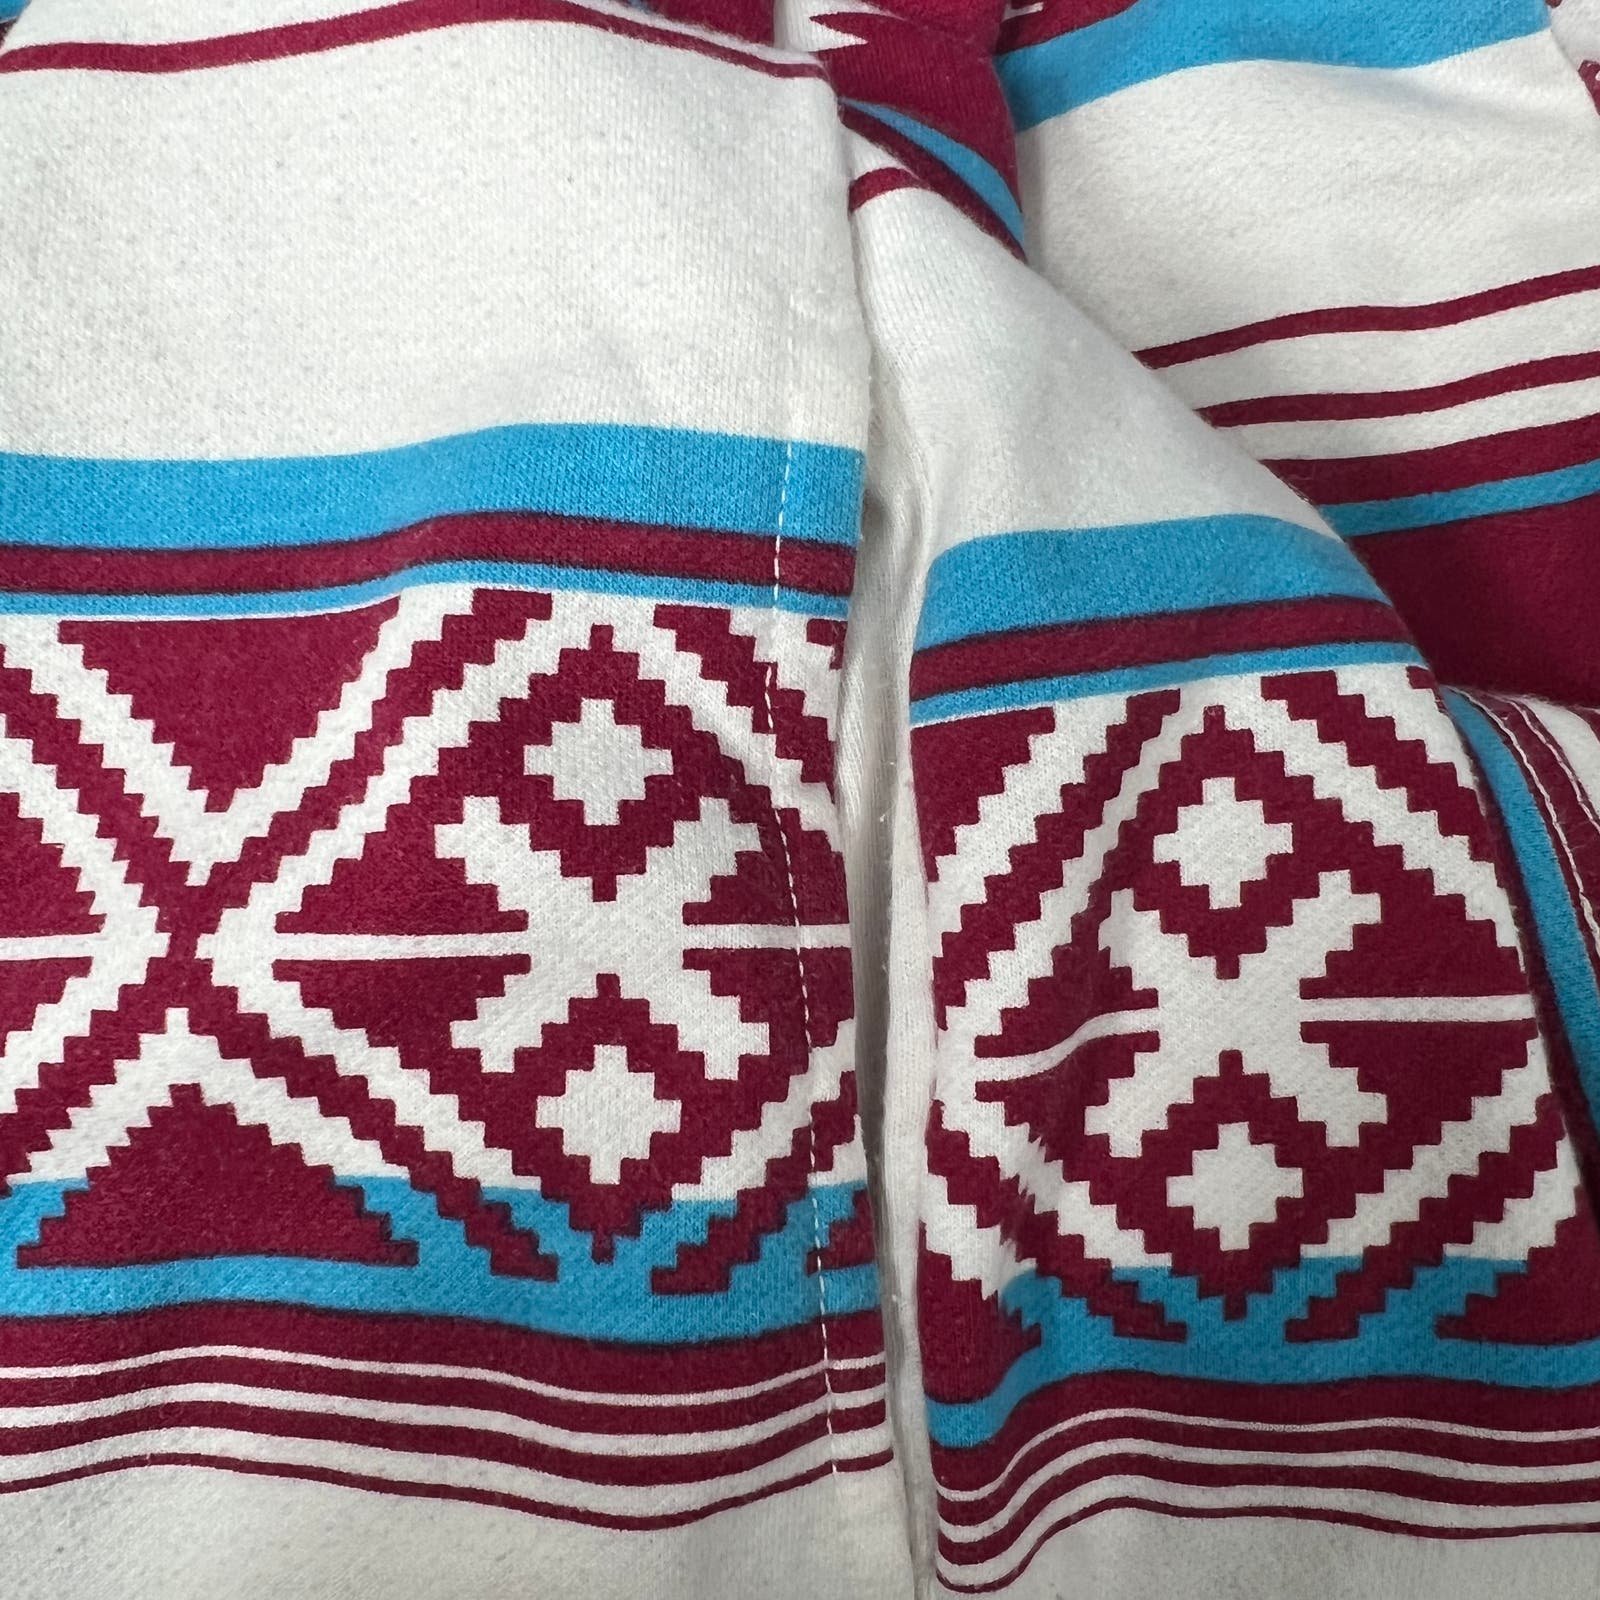 Authentic Truly Madly Deeply Aztec Print Bohemian Long Sleeve Women´s Sweater/Top Size XS gDEp3FMZW Outlet Store